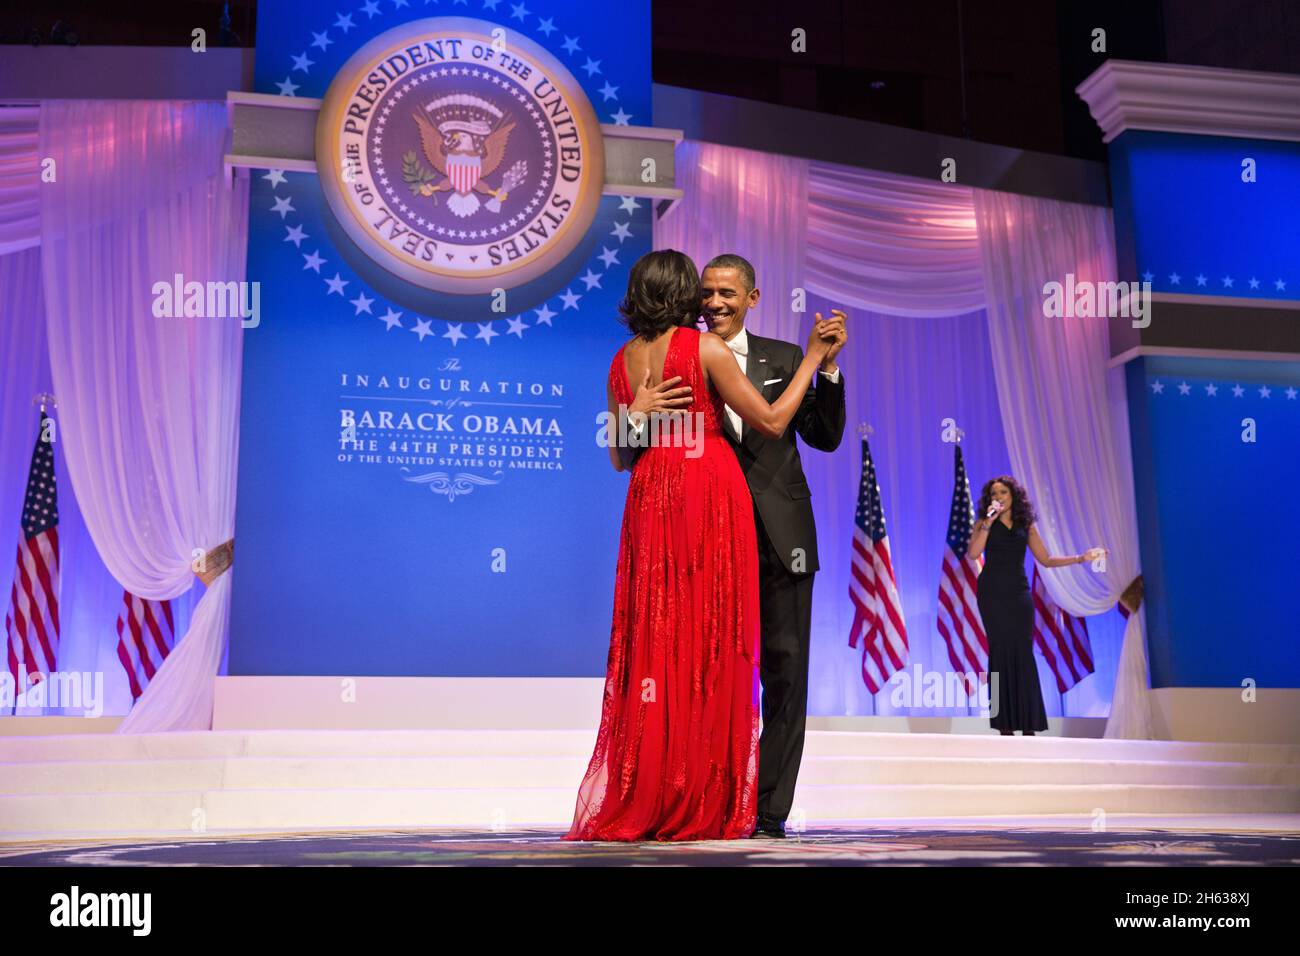 President Barack Obama and First Lady Michelle Obama dance at the Commander in Chief Ball at the Walter E. Washington Convention Center in Washington, D.C., Jan. 21, 2013. The President and First Lady danced to  'Let's Stay Together' performed by Jennifer Hudson, right. Stock Photo